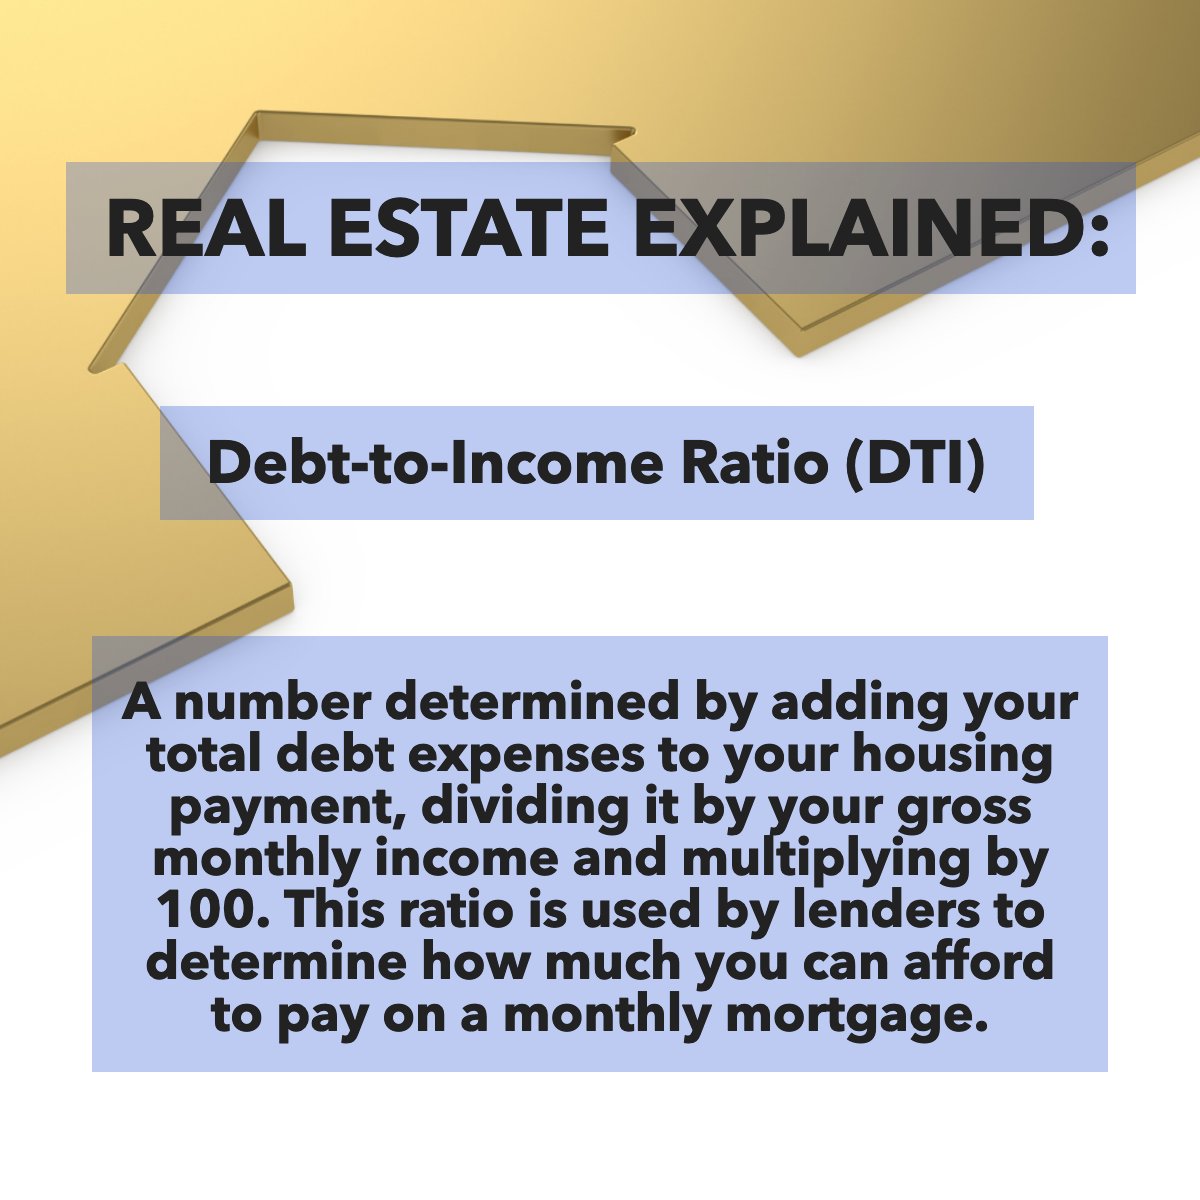 Real Estate Explained: 'Debt-to-Income Ratio (DTI)' Real estate agents sometimes use terms we might not be familiar with, here's one you can't miss. 💰📈 #realestate #debttoincome #realestateadvice #realestateexperts #realestate101